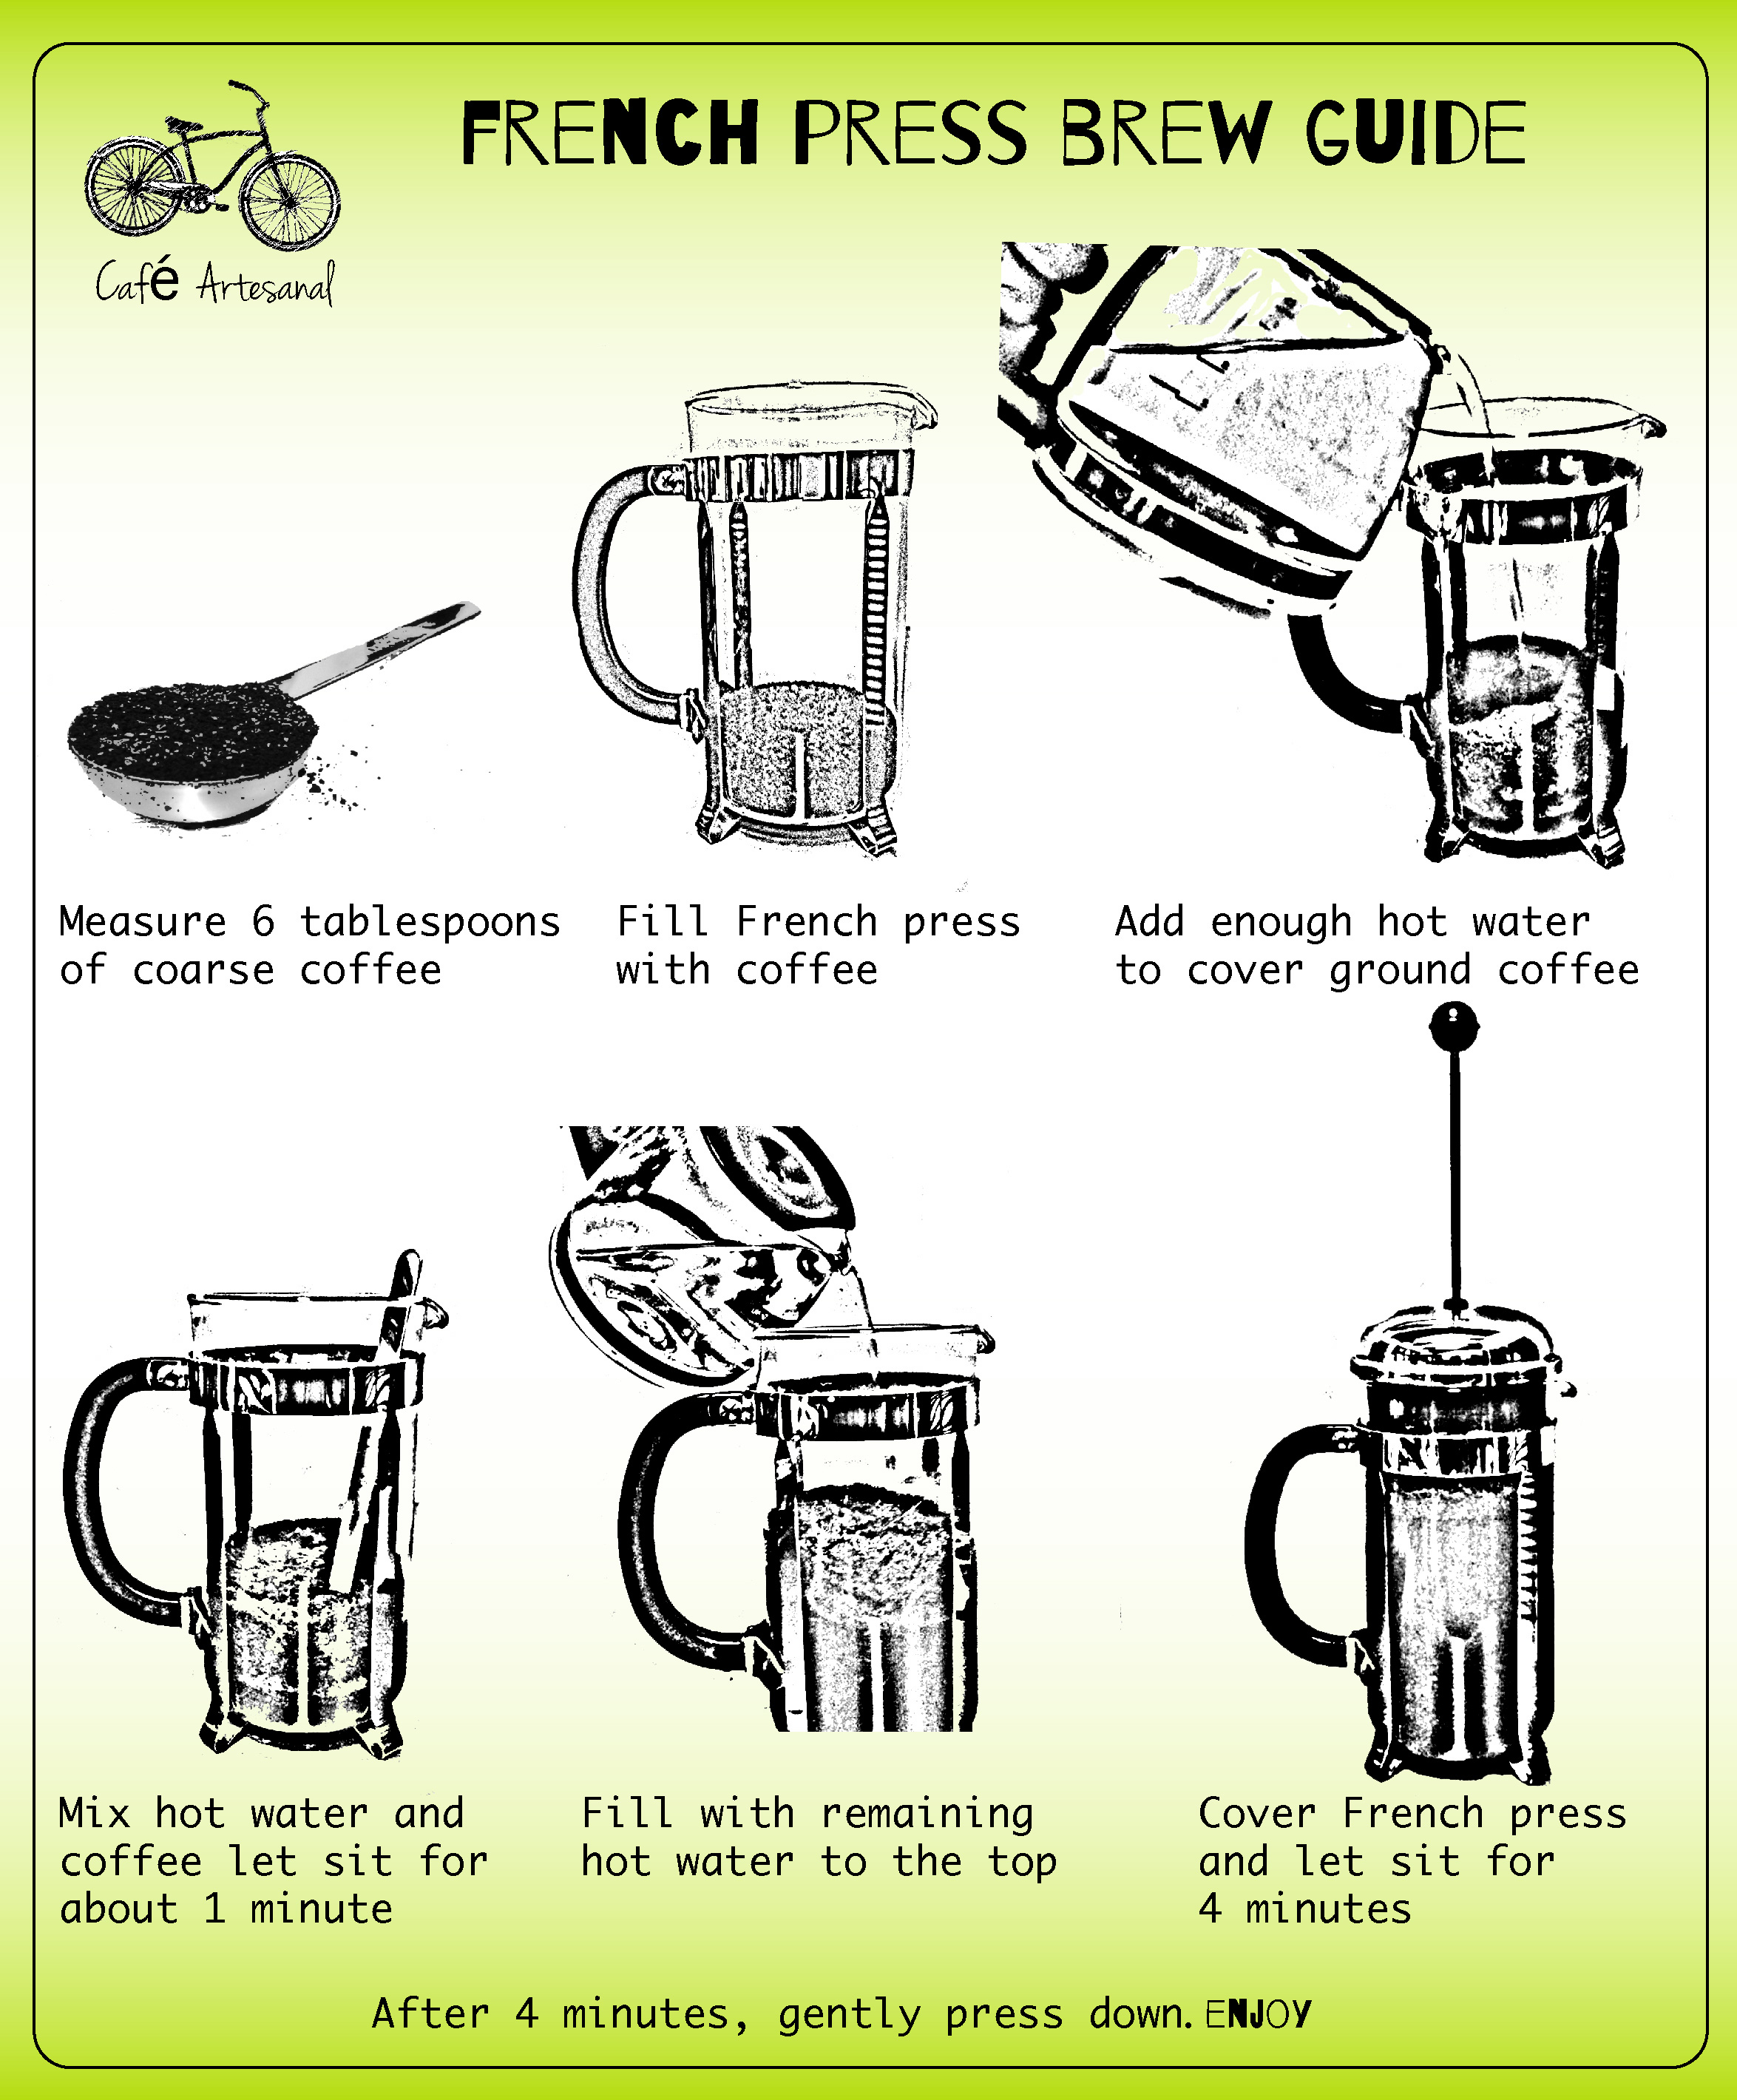 French Press Coffee Brewing Guide - How to Use a French Press to Brew